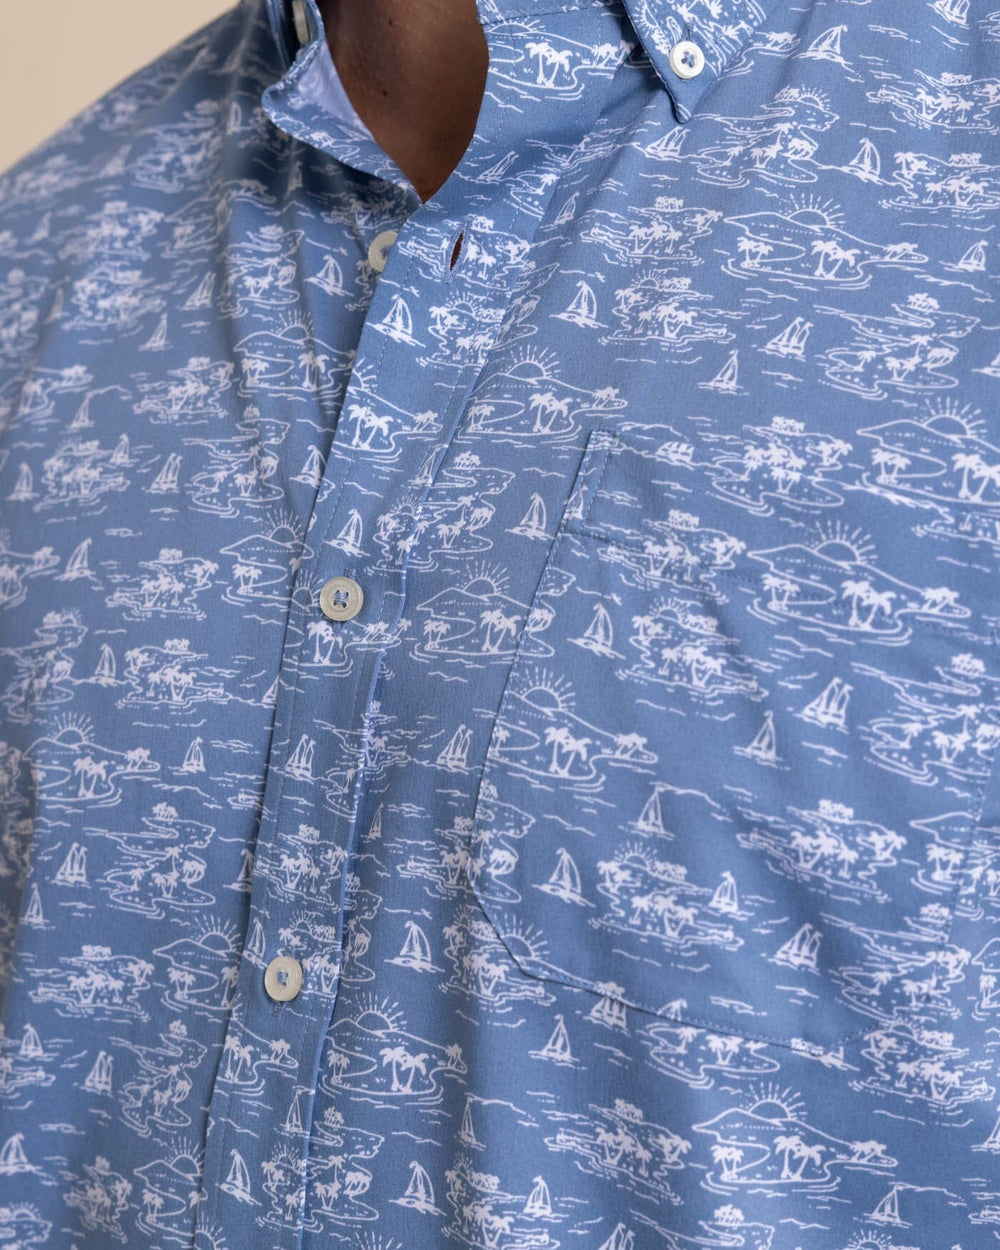 The detail view of the Southern Tide brrr Intercoastal Sunset Beach Short Sleeve SportShirt by Southern Tide - Coronet Blue